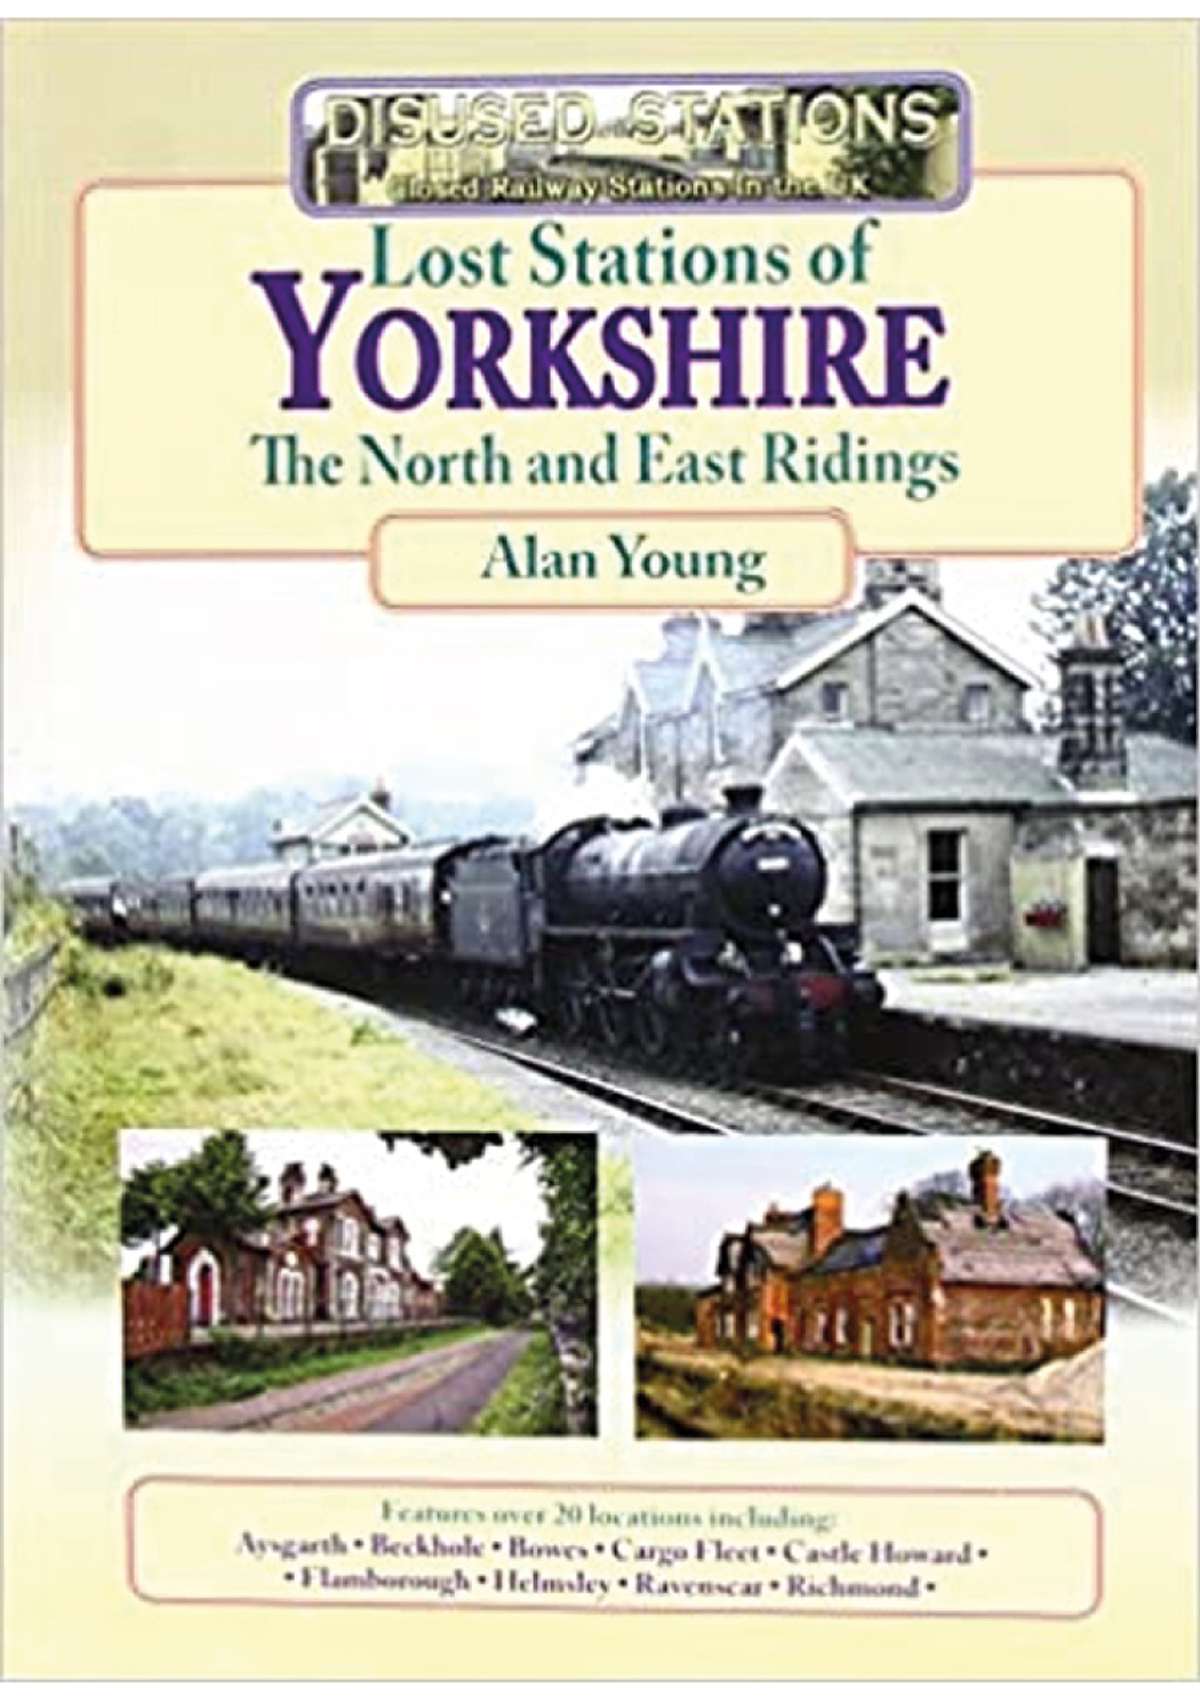 4532 - Lost Stations of Yorkshire Part 2: The North and East Ridings